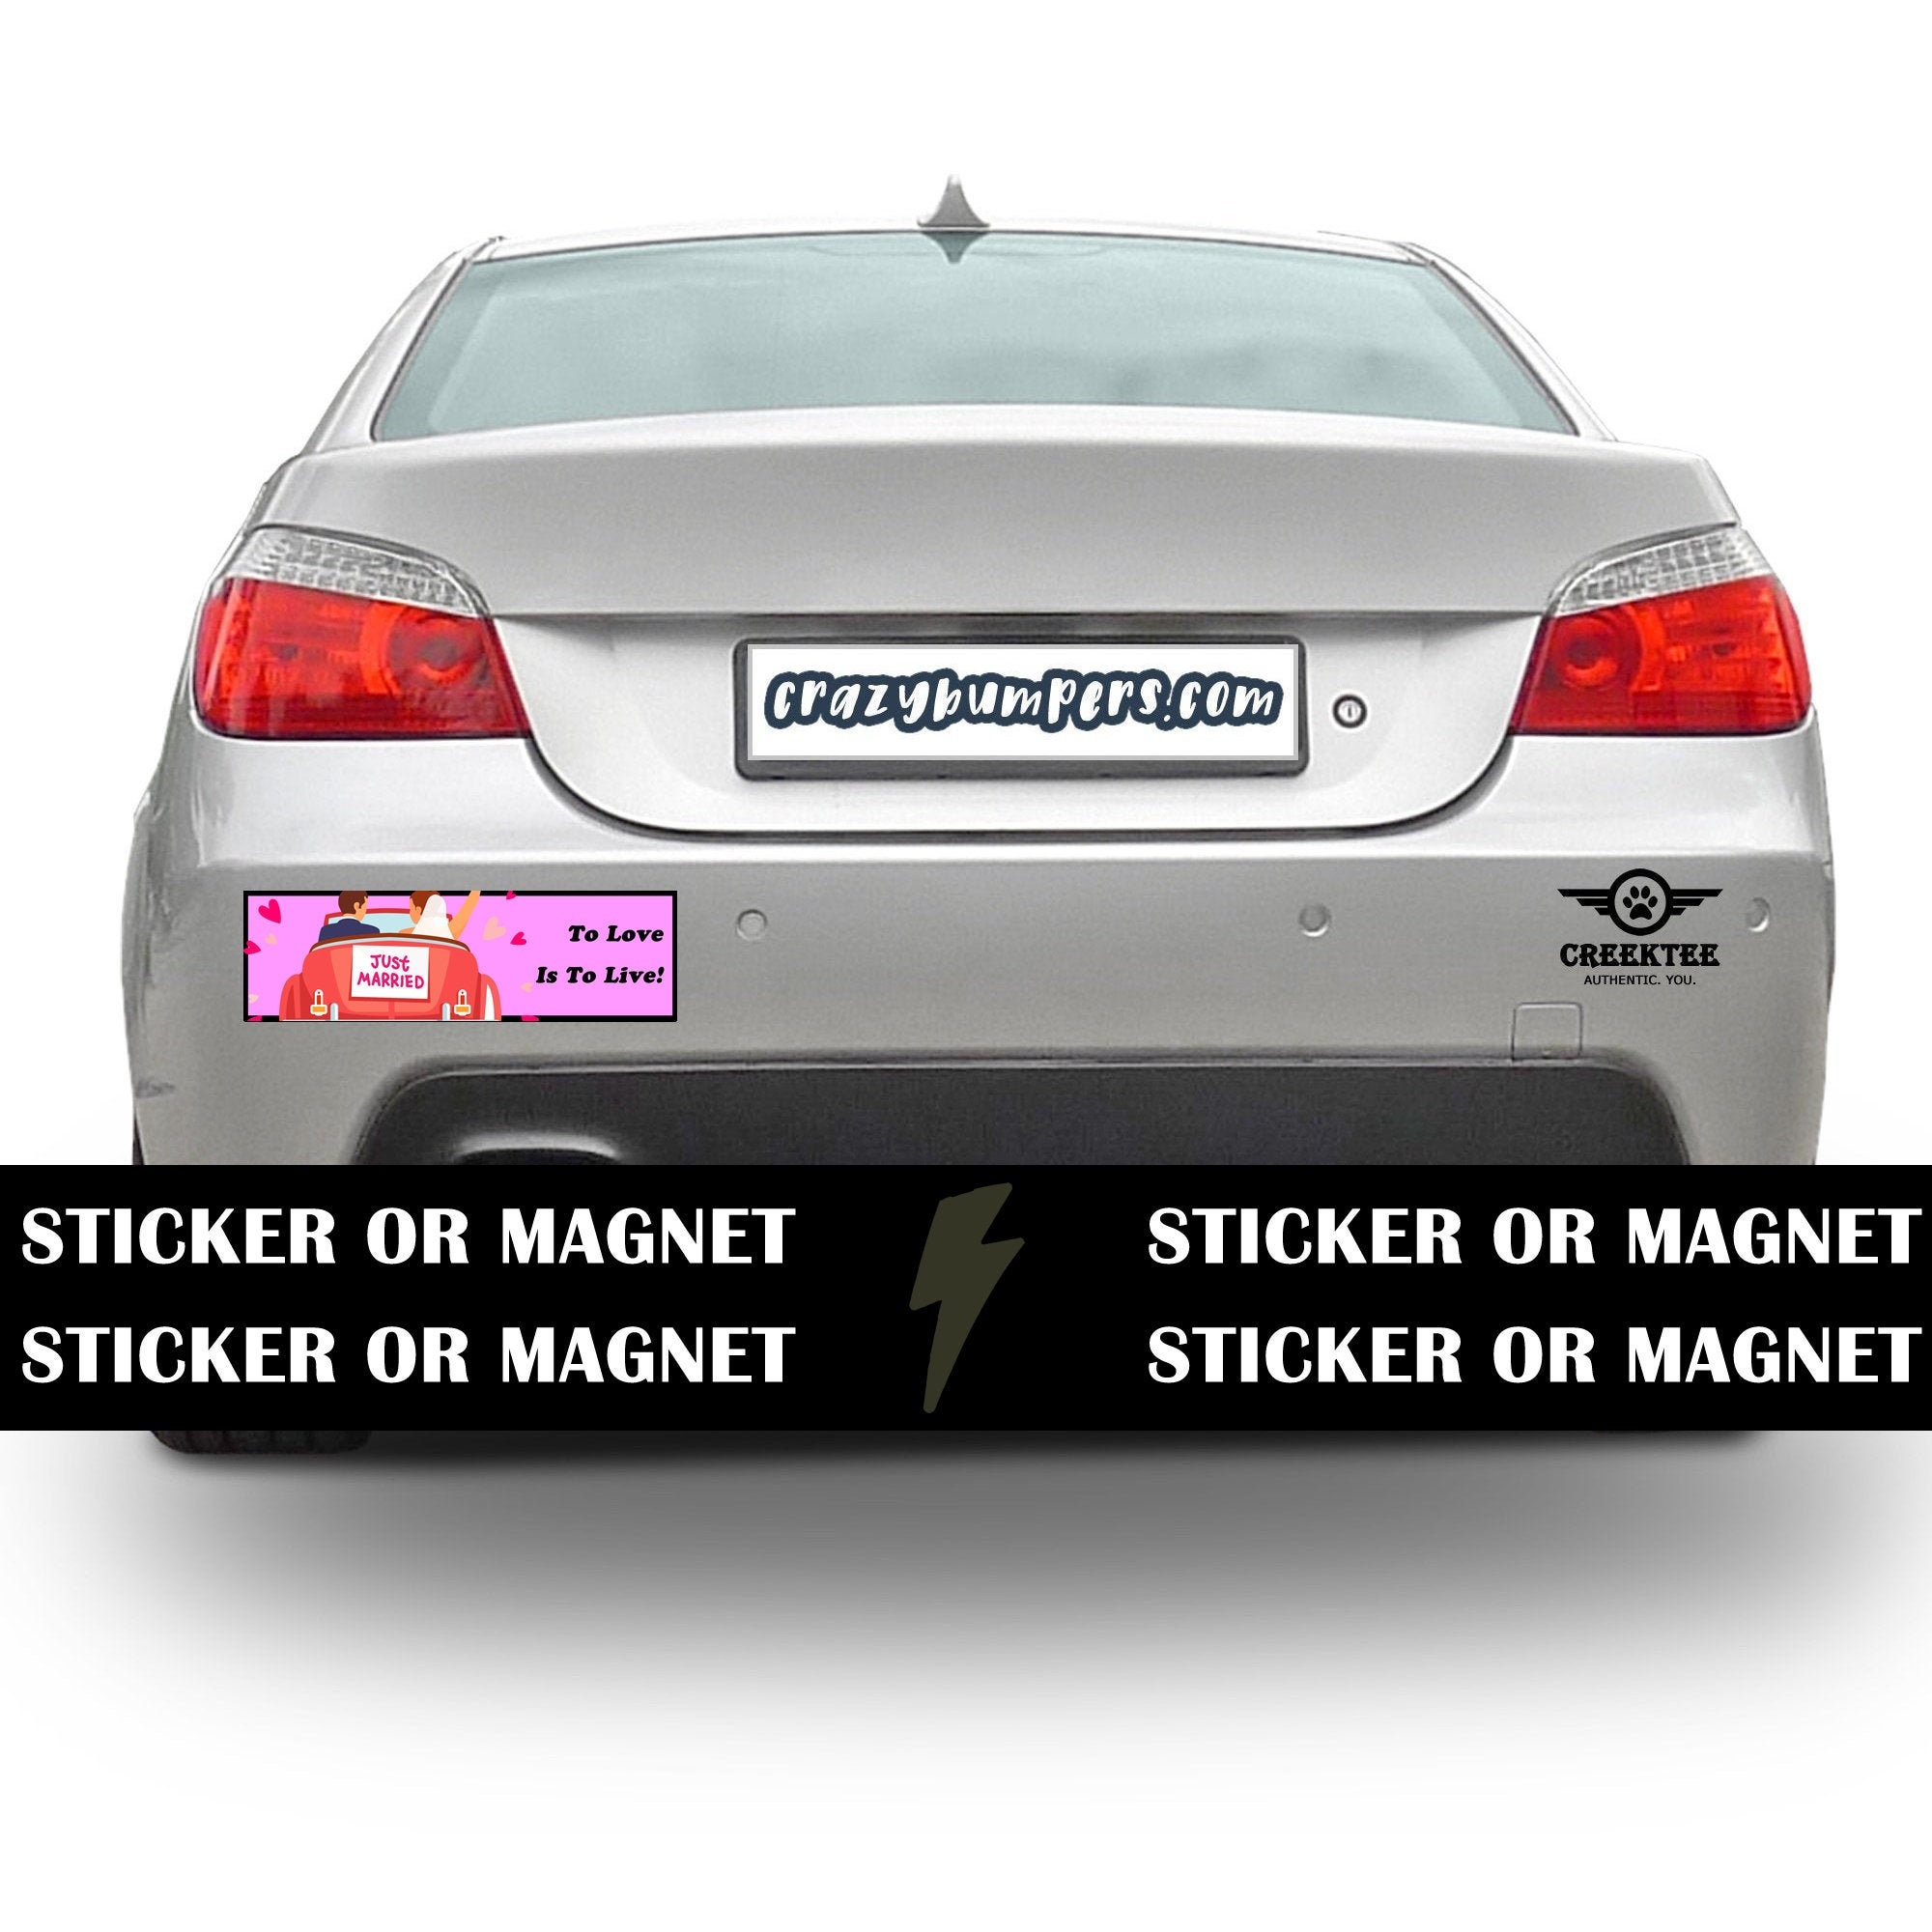 Just Married Bumper Sticker 10 x 3 Bumper Sticker or Magnetic Bumper Sticker Available - Custom changes and orders welcomed!